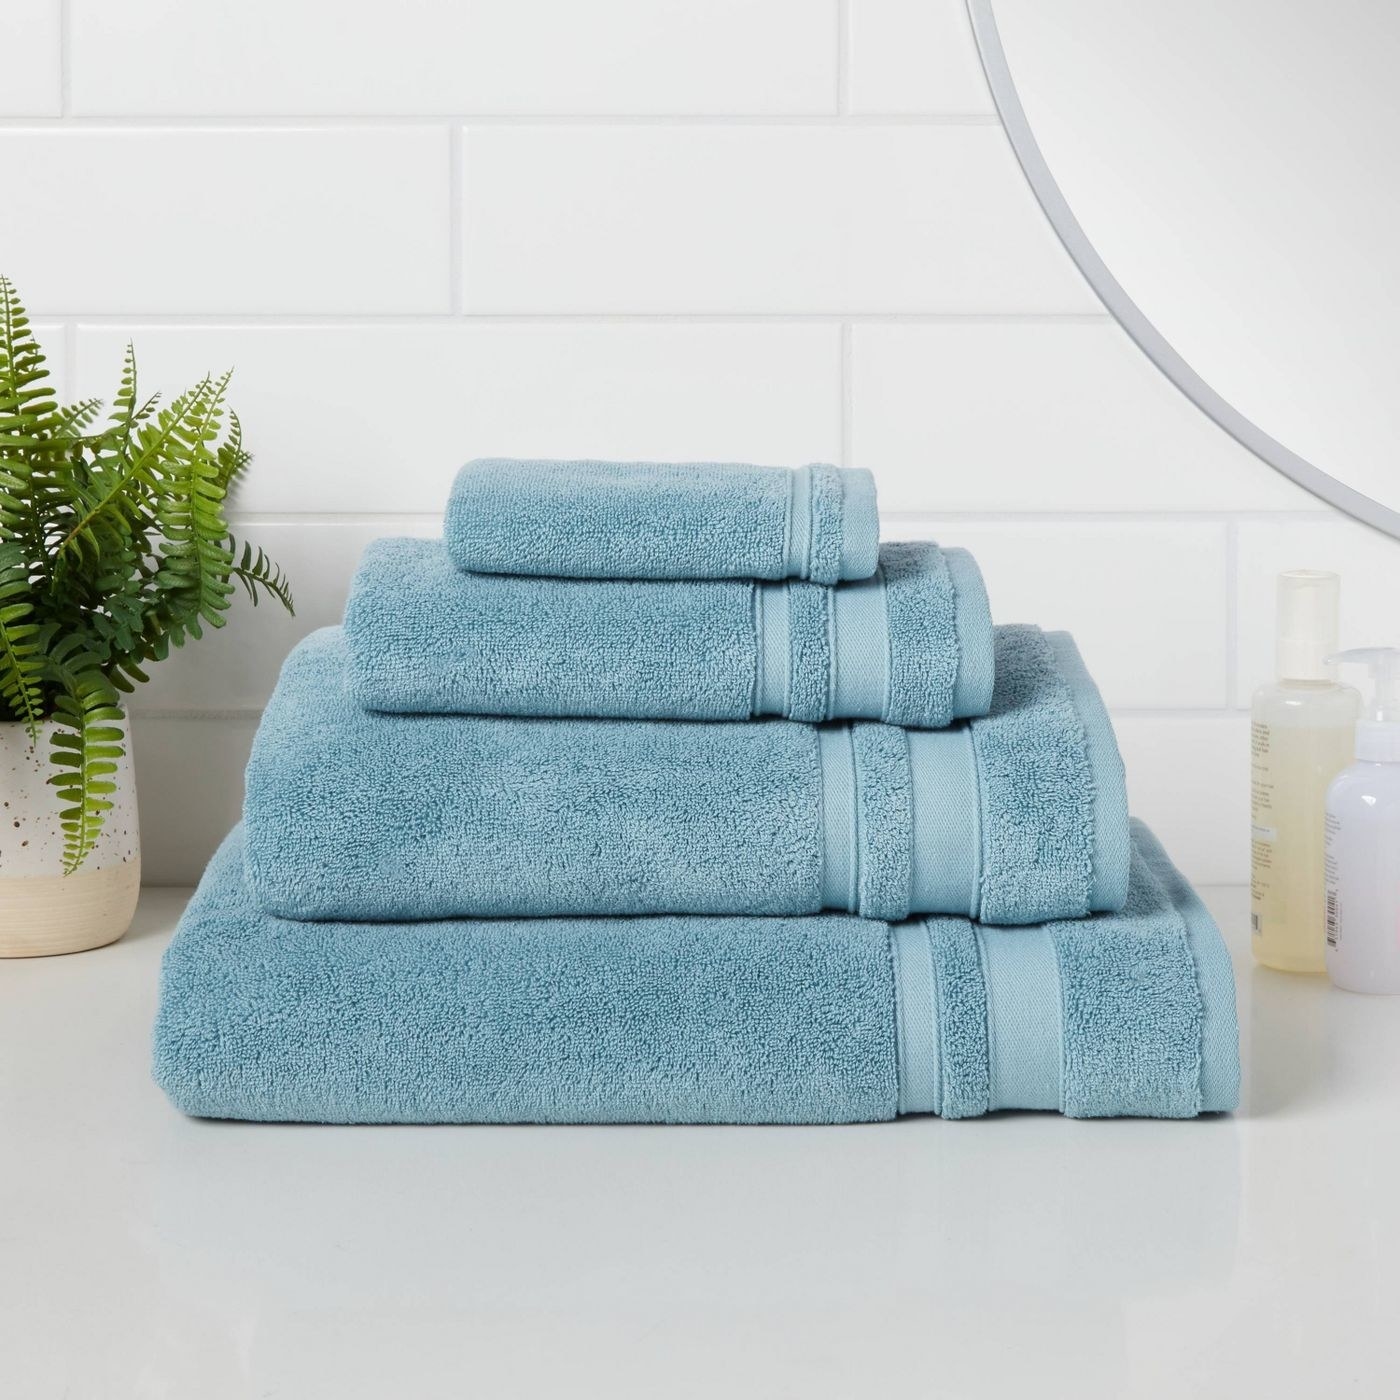 the towels in blue